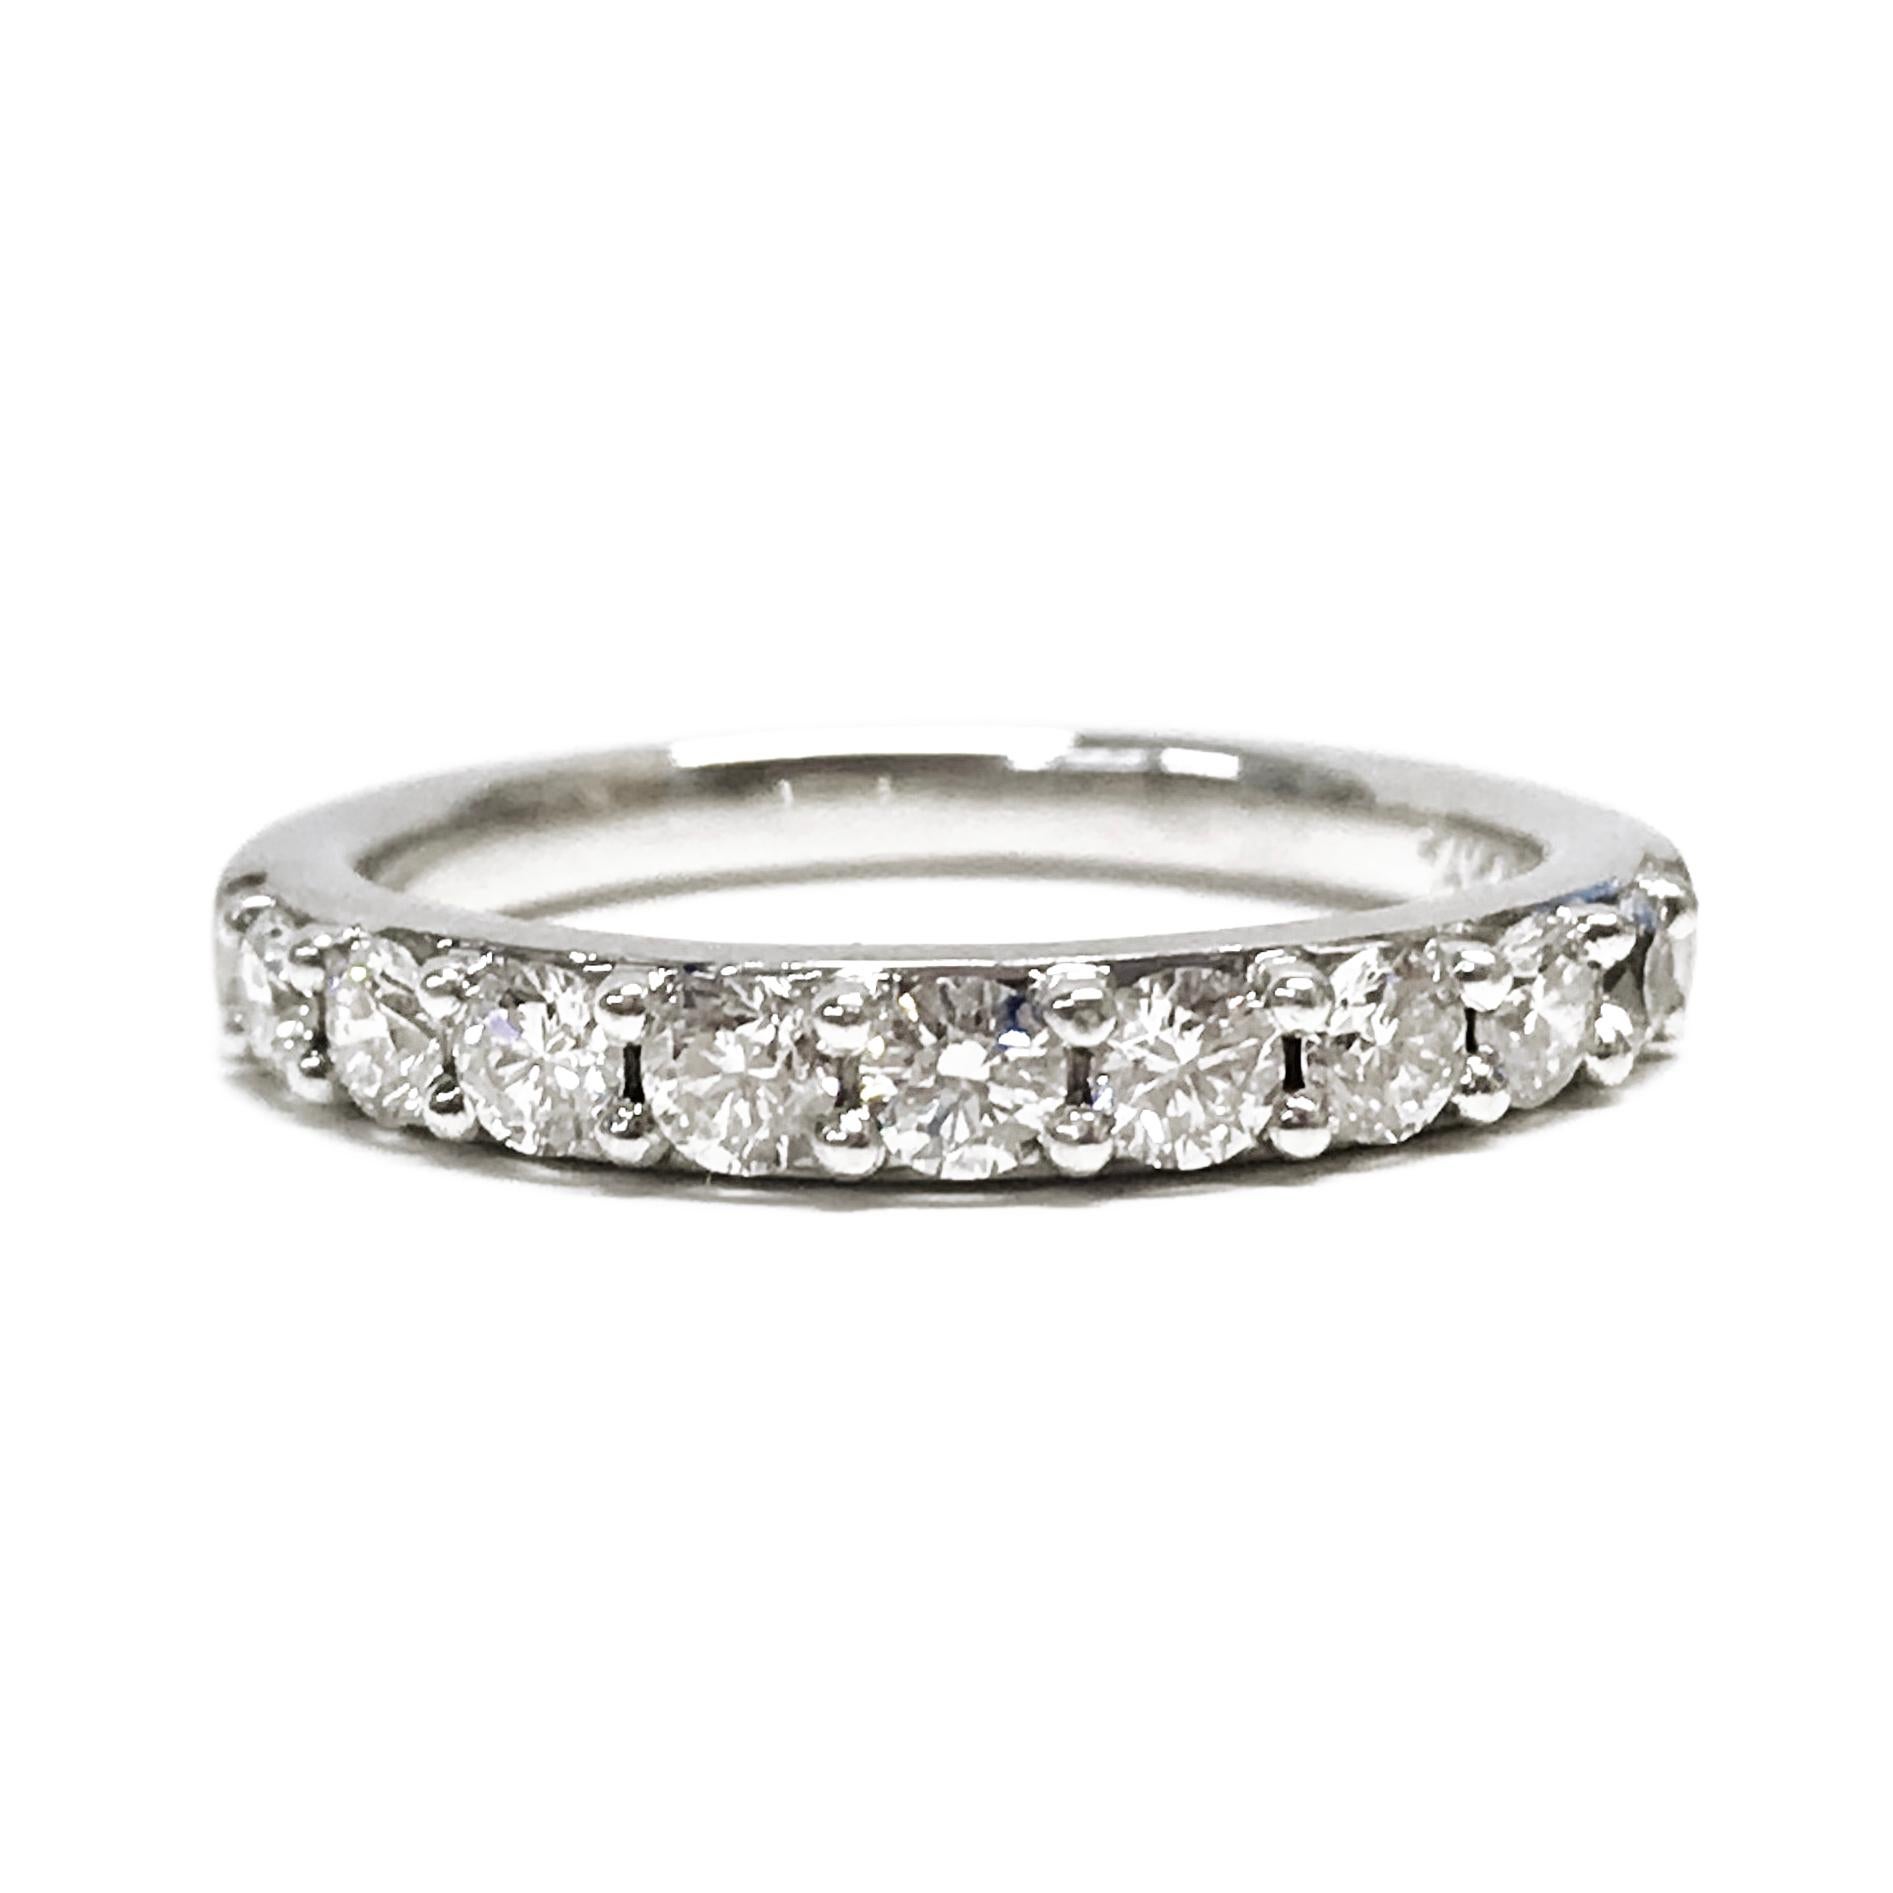 14 Karat White Gold Nine Diamond Ring. The classic band features nine round prong-set diamonds. Stamped on the inside of the band is the maker's mark RB 14K 585S. Diamonds are SI1-SI2 (G.I.A.) in clarity and G-H in color (G.I.A.). The diamonds